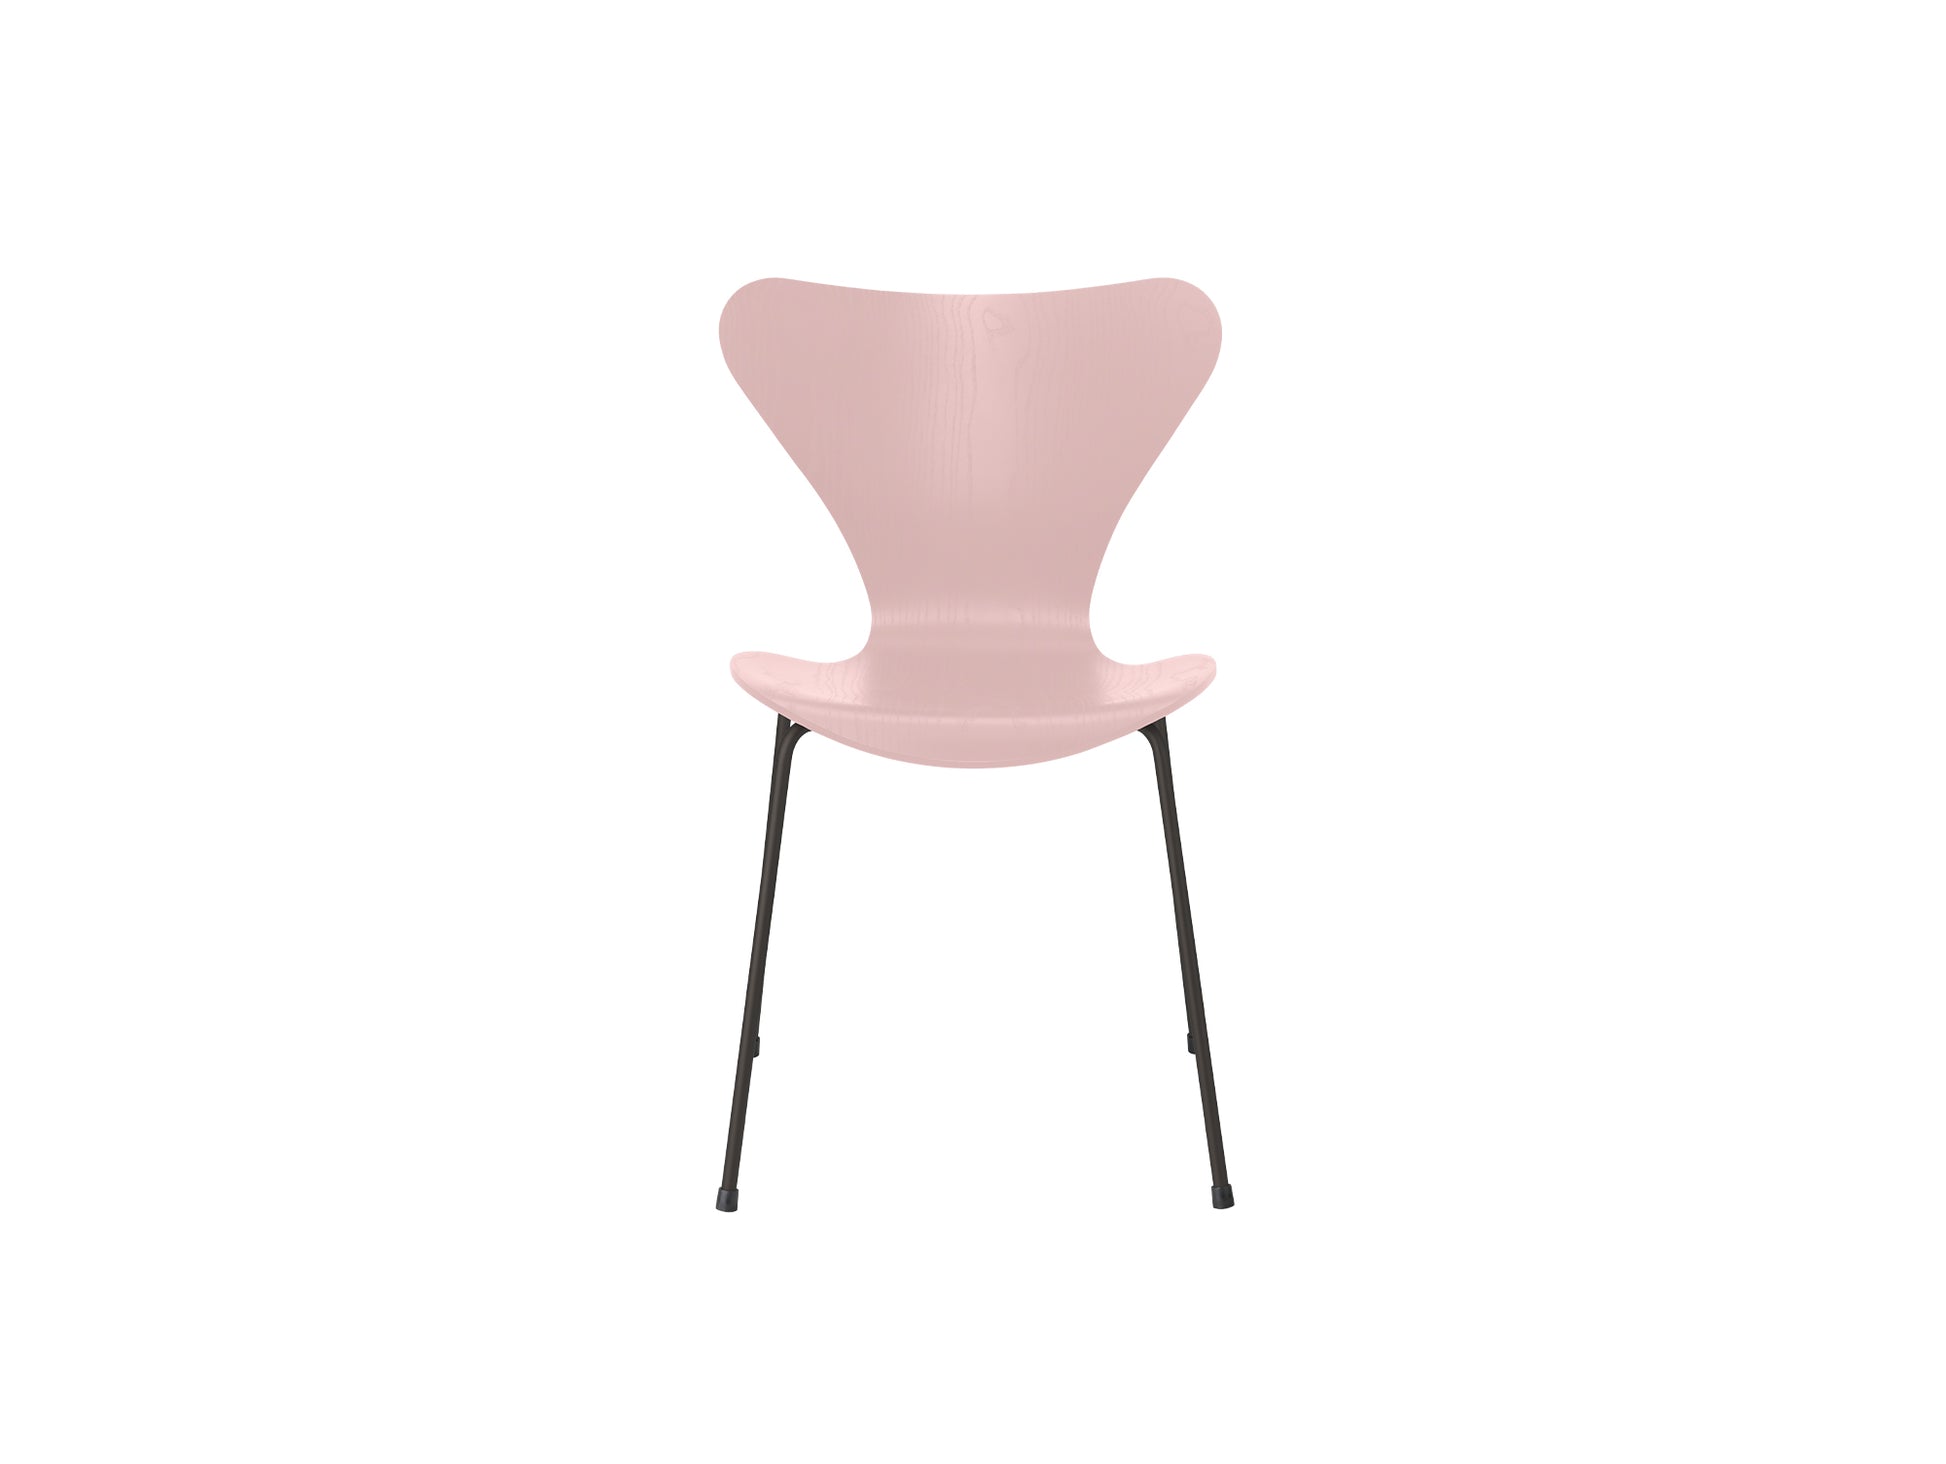 Series 7™ 3107 Dining Chair by Fritz Hansen - Pale Rose Coloured Ash Veneer Shell / Warm Graphite Steel